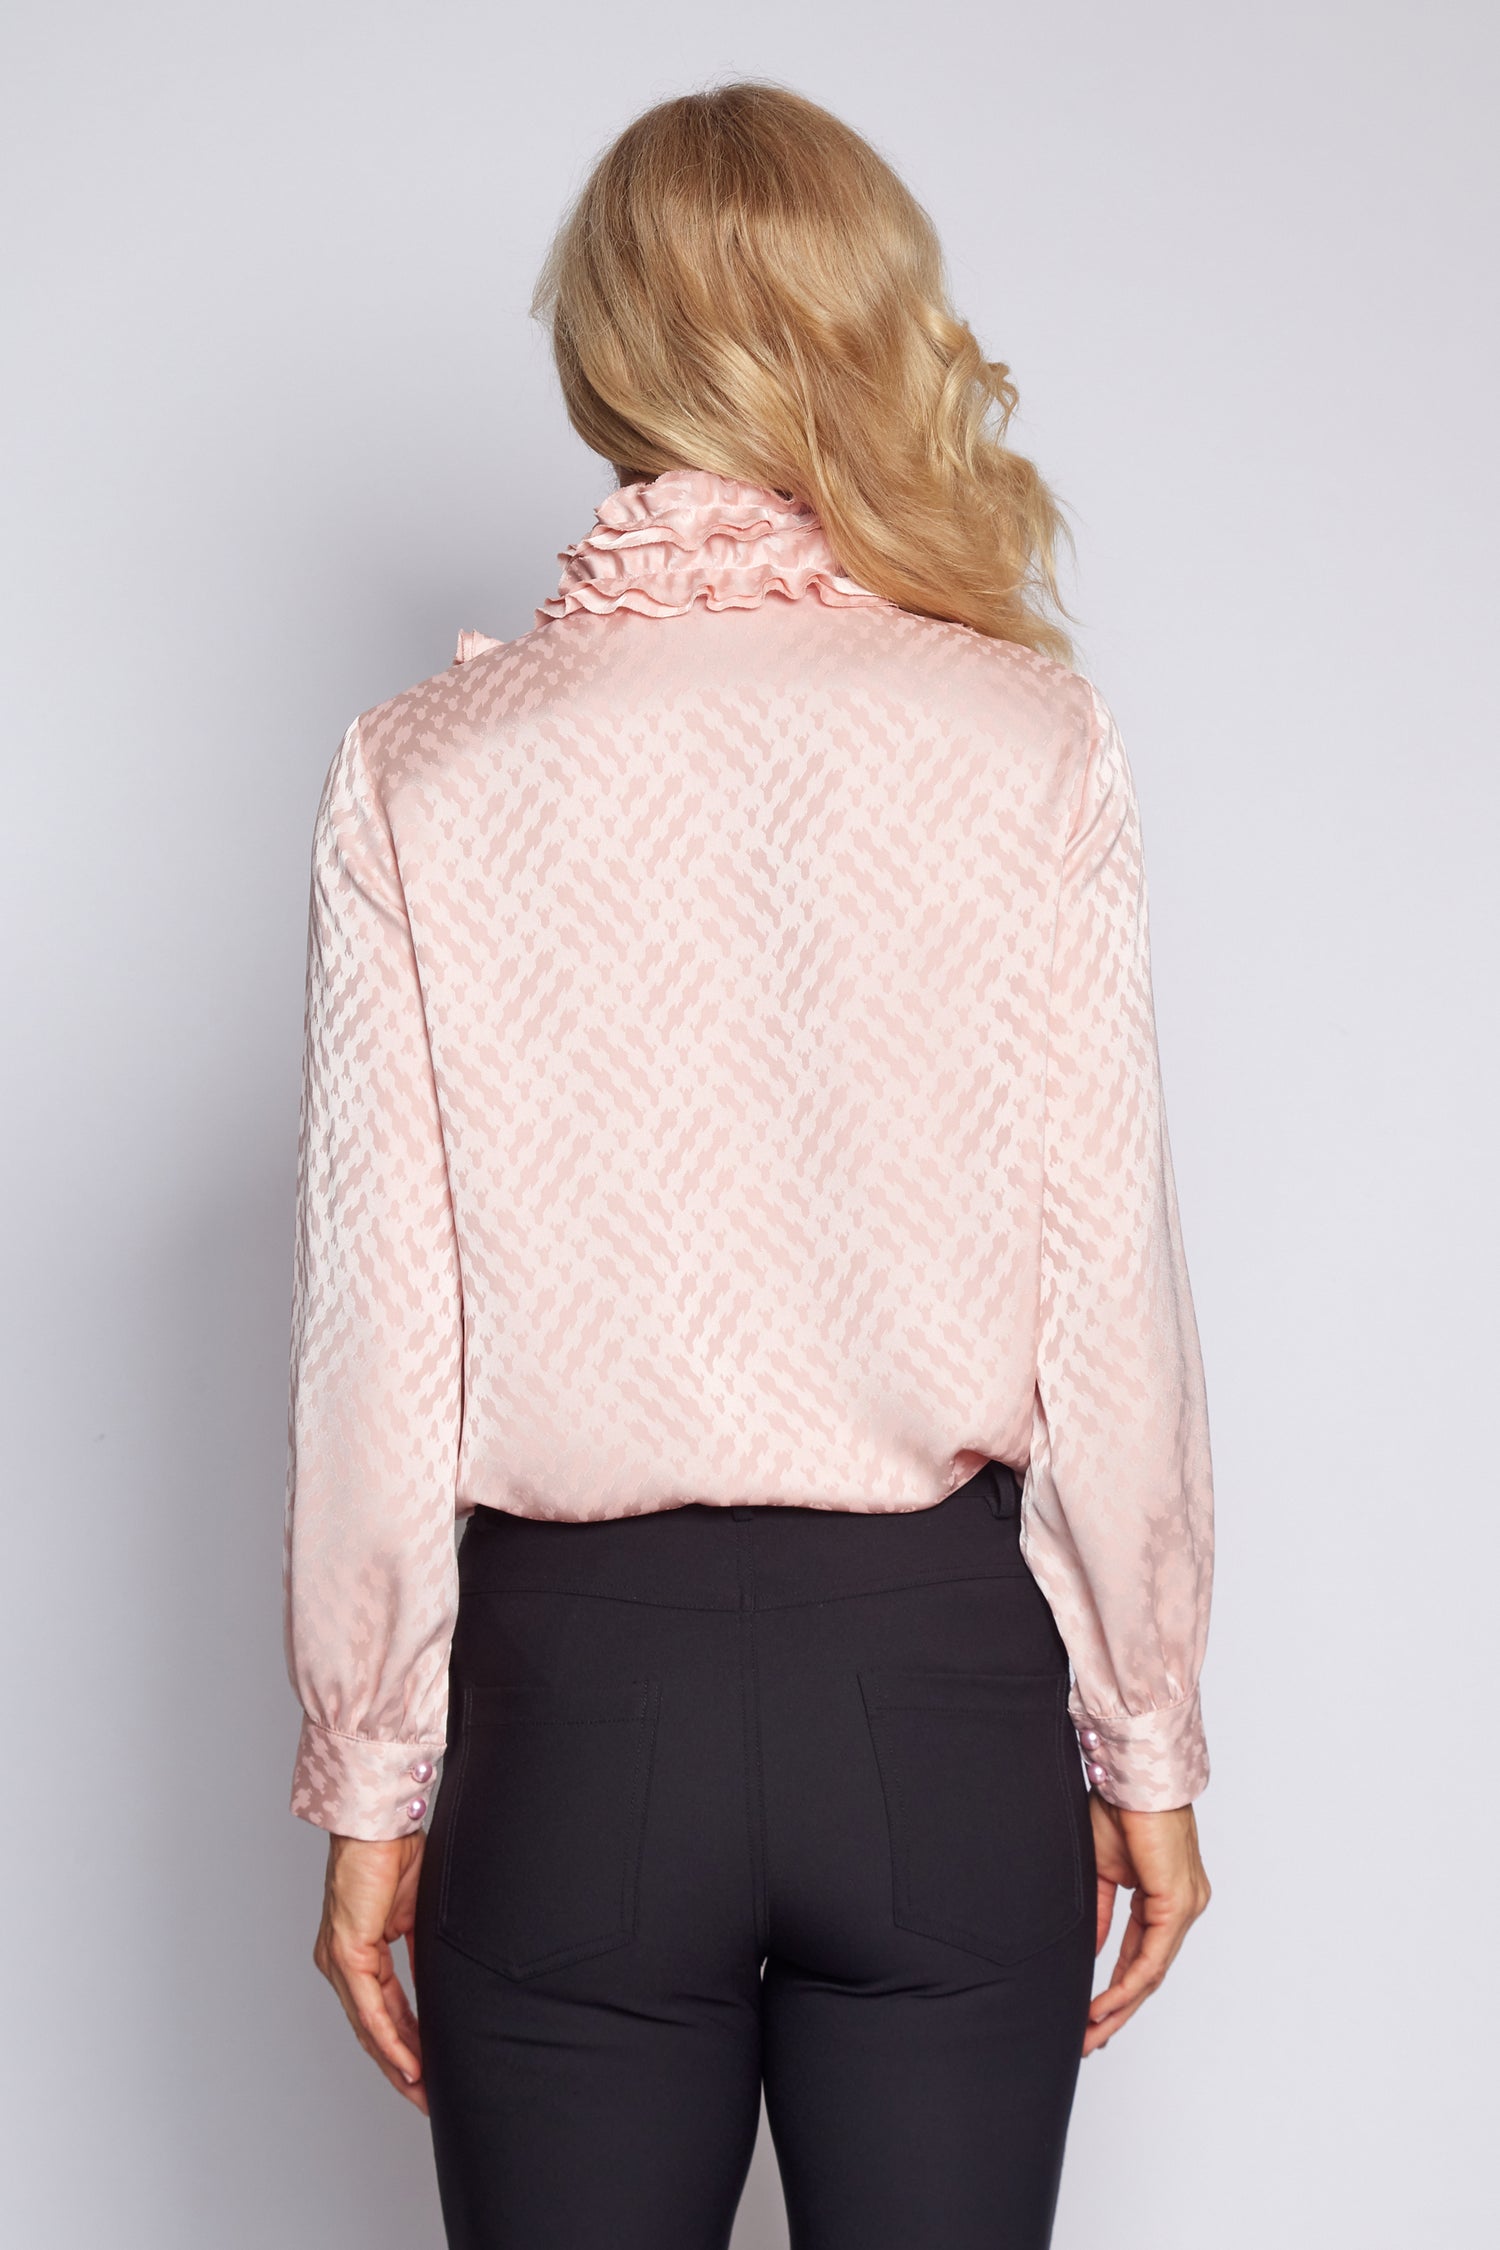 Print Iconic Frill Blouse